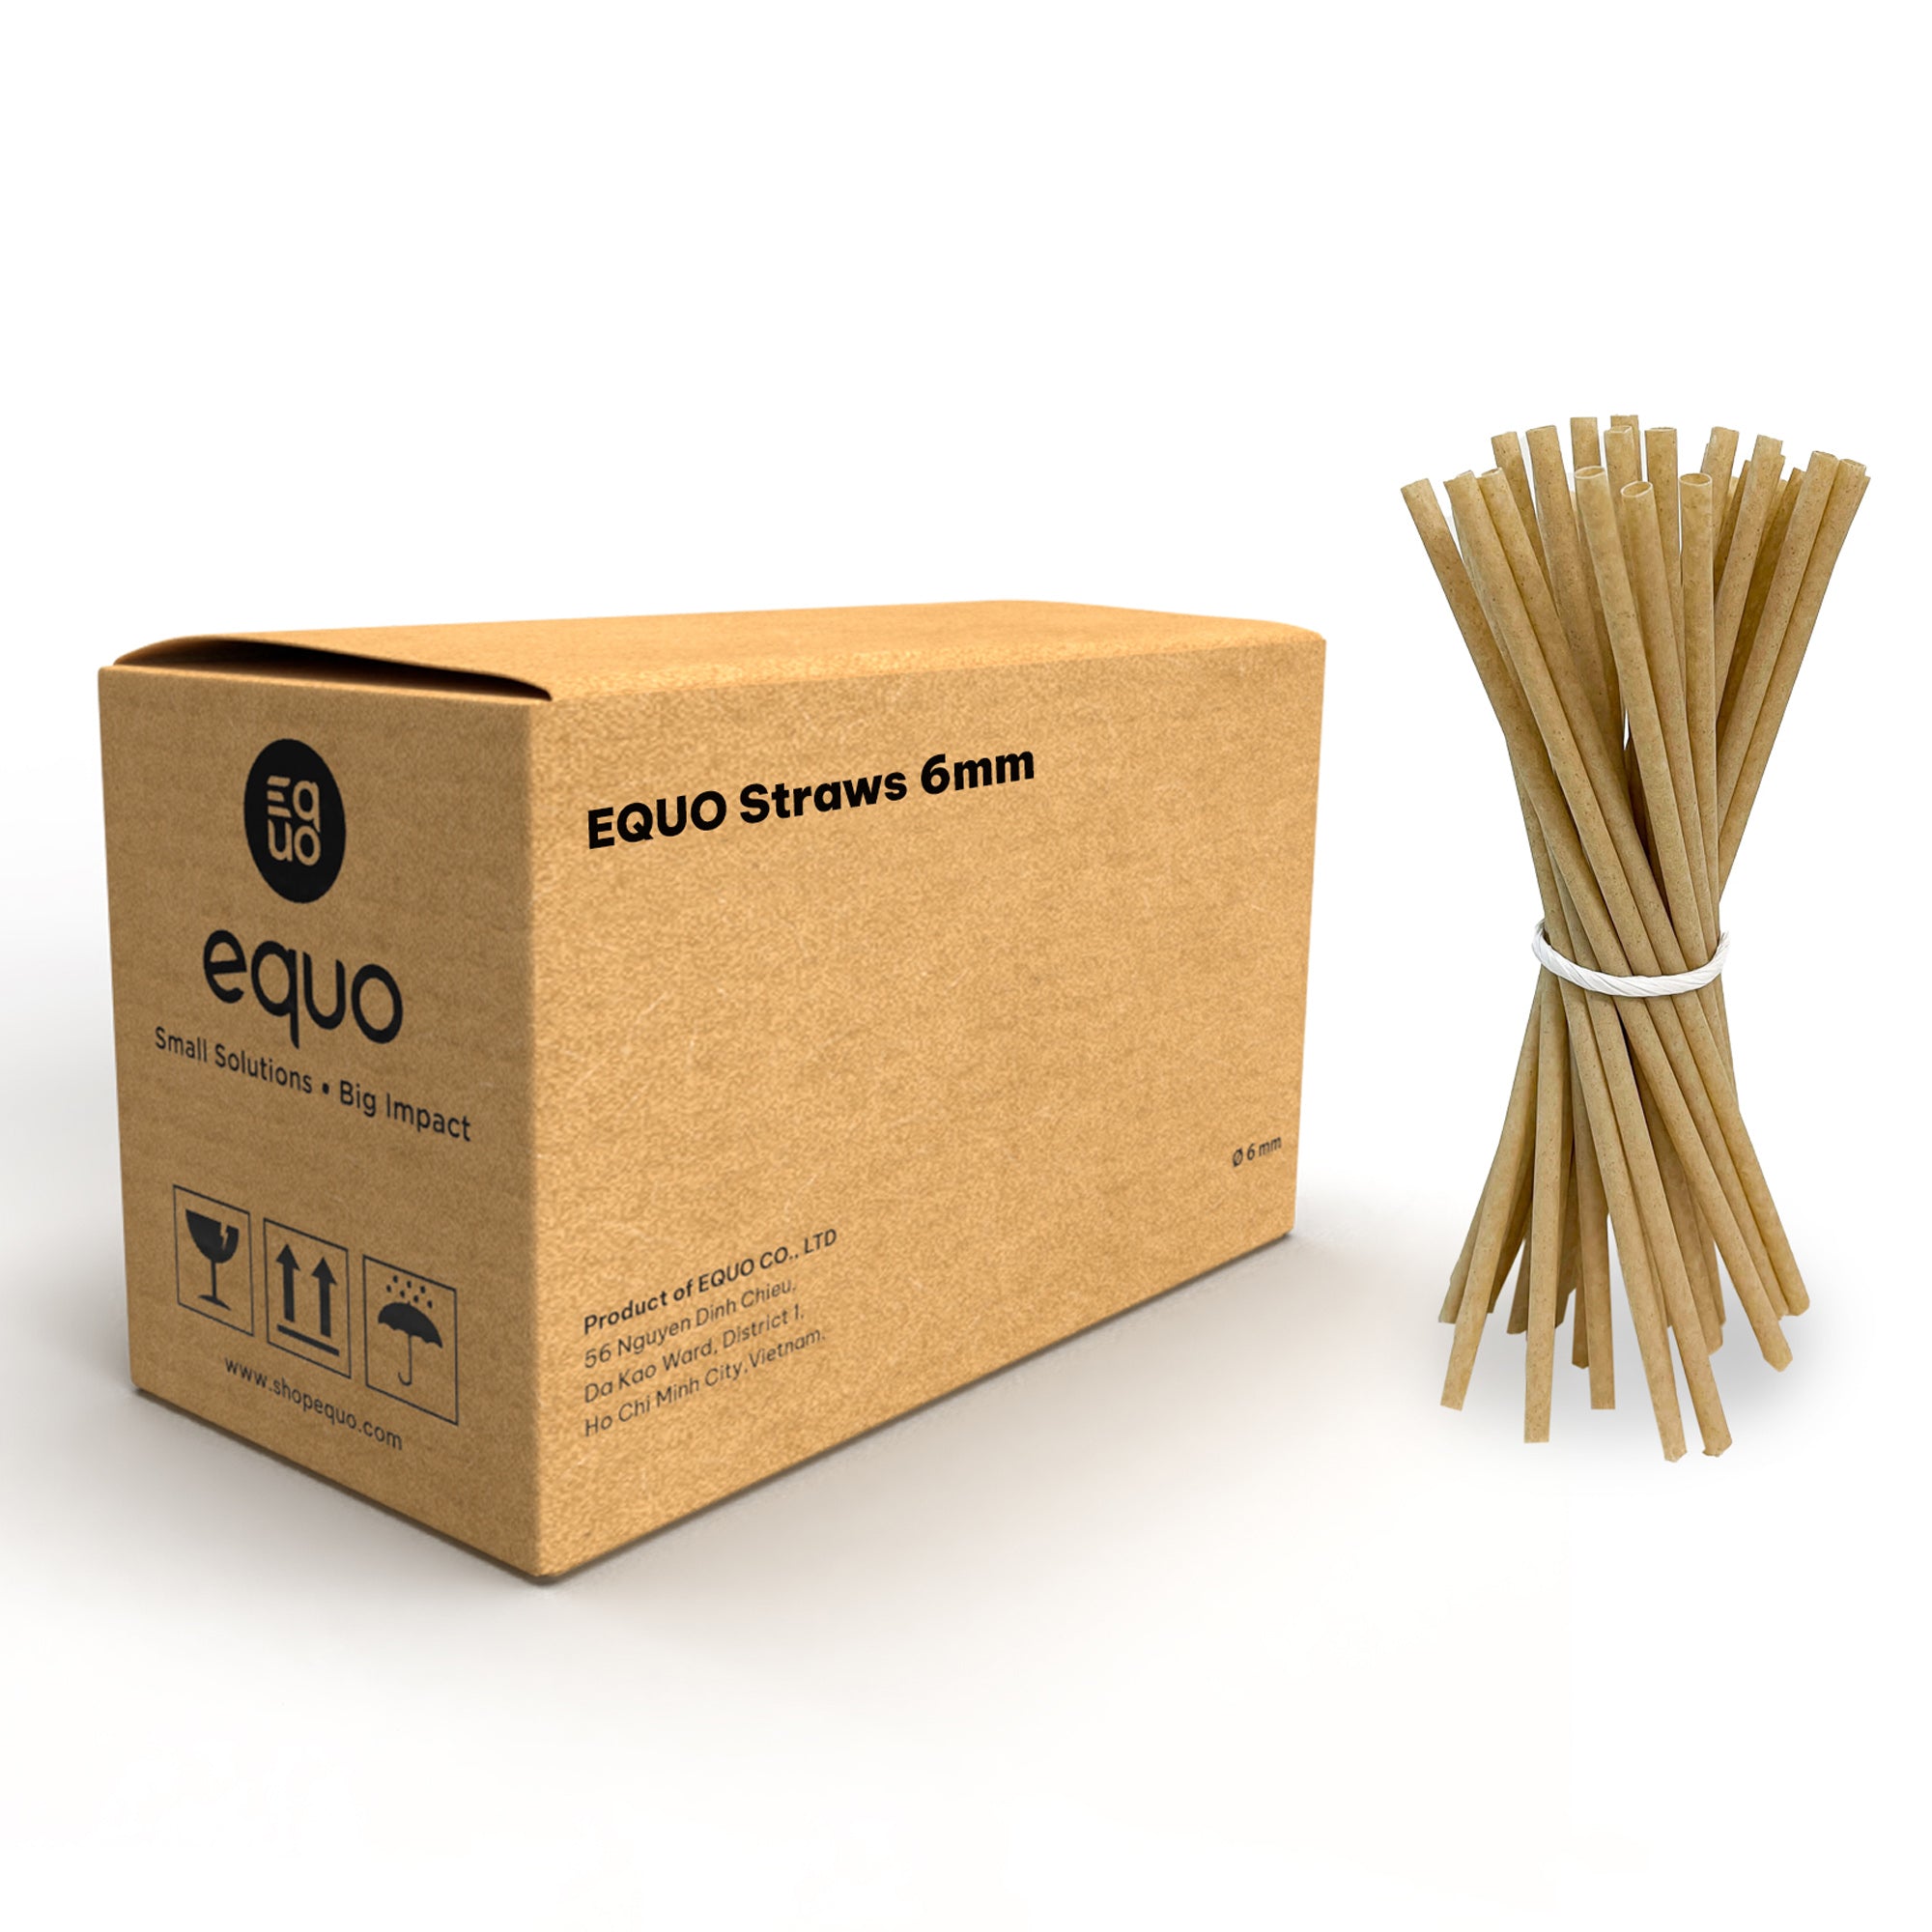 Sugarcane Drinking Straws (Wholesale/Bulk), Standard Size - 1000 count by EQUO